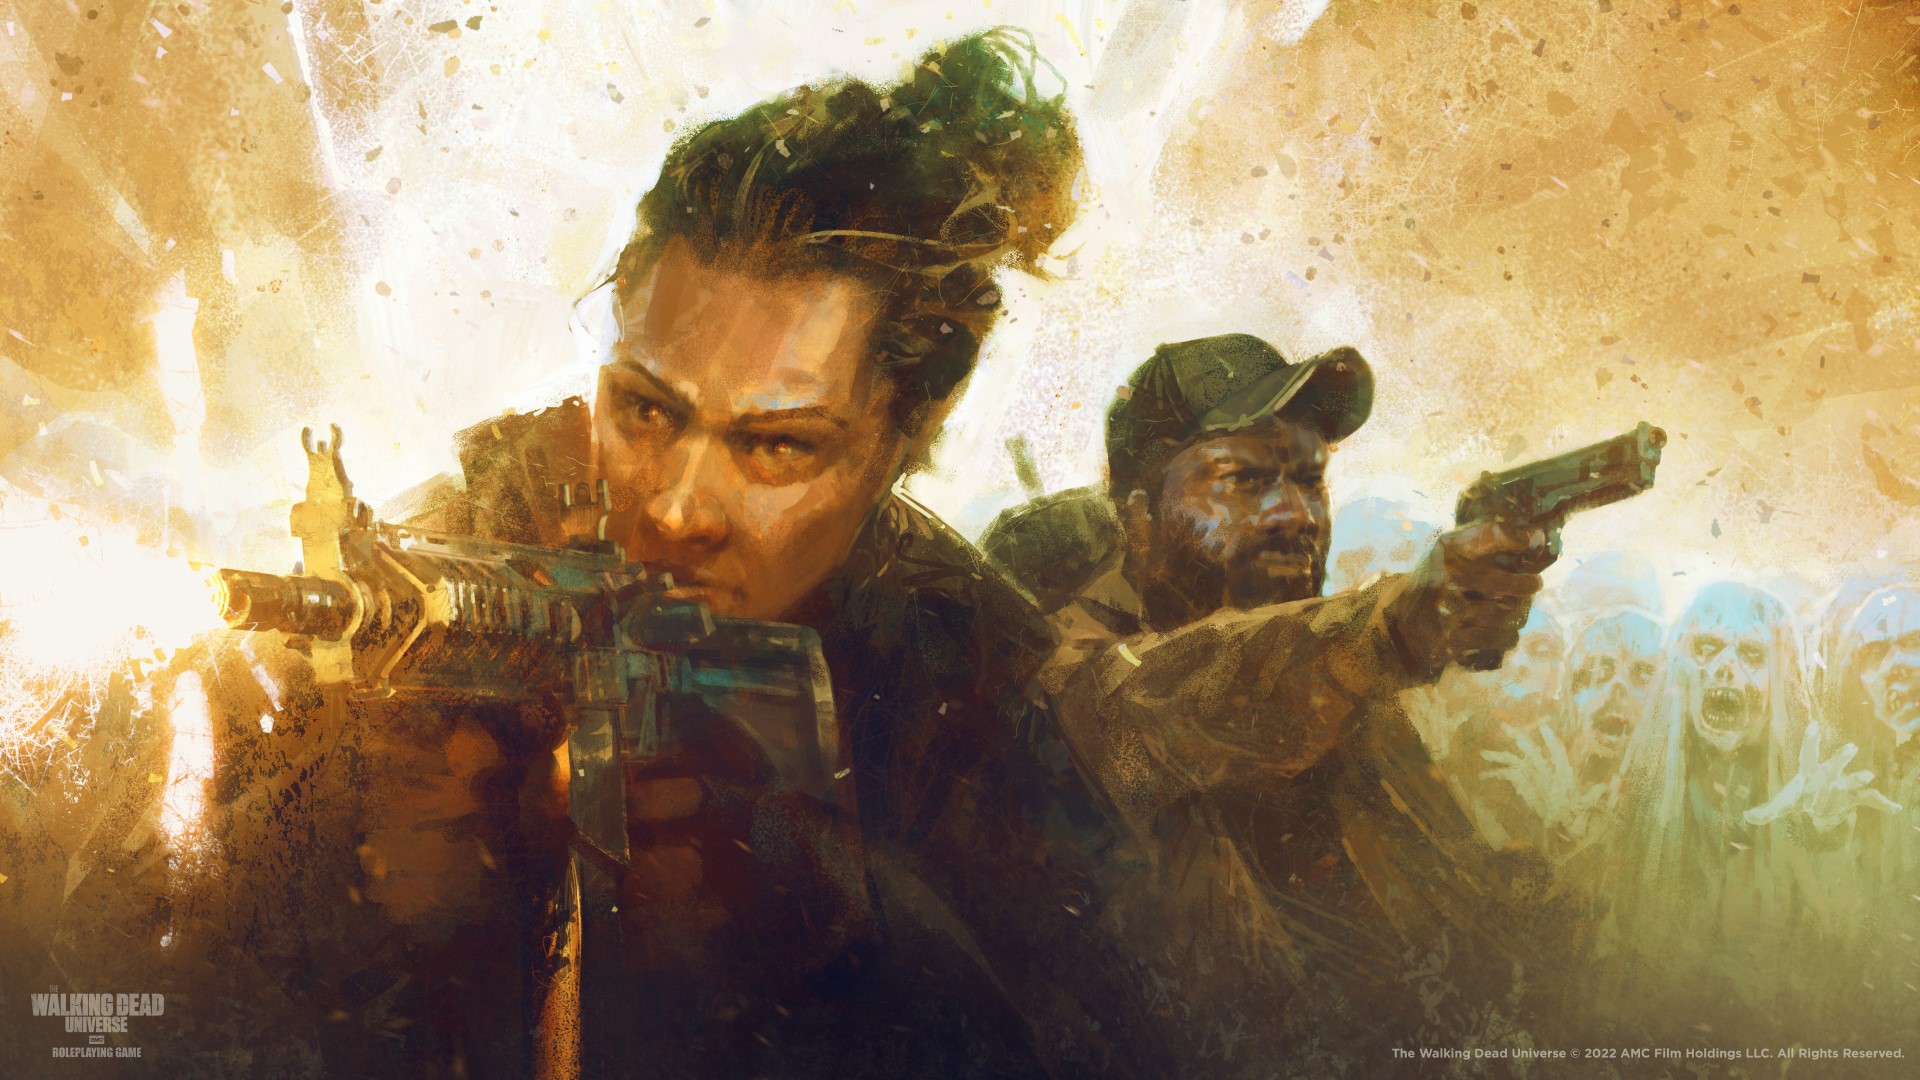 Free League Publishing art of two characters from The Walking Dead RPG aiming guns